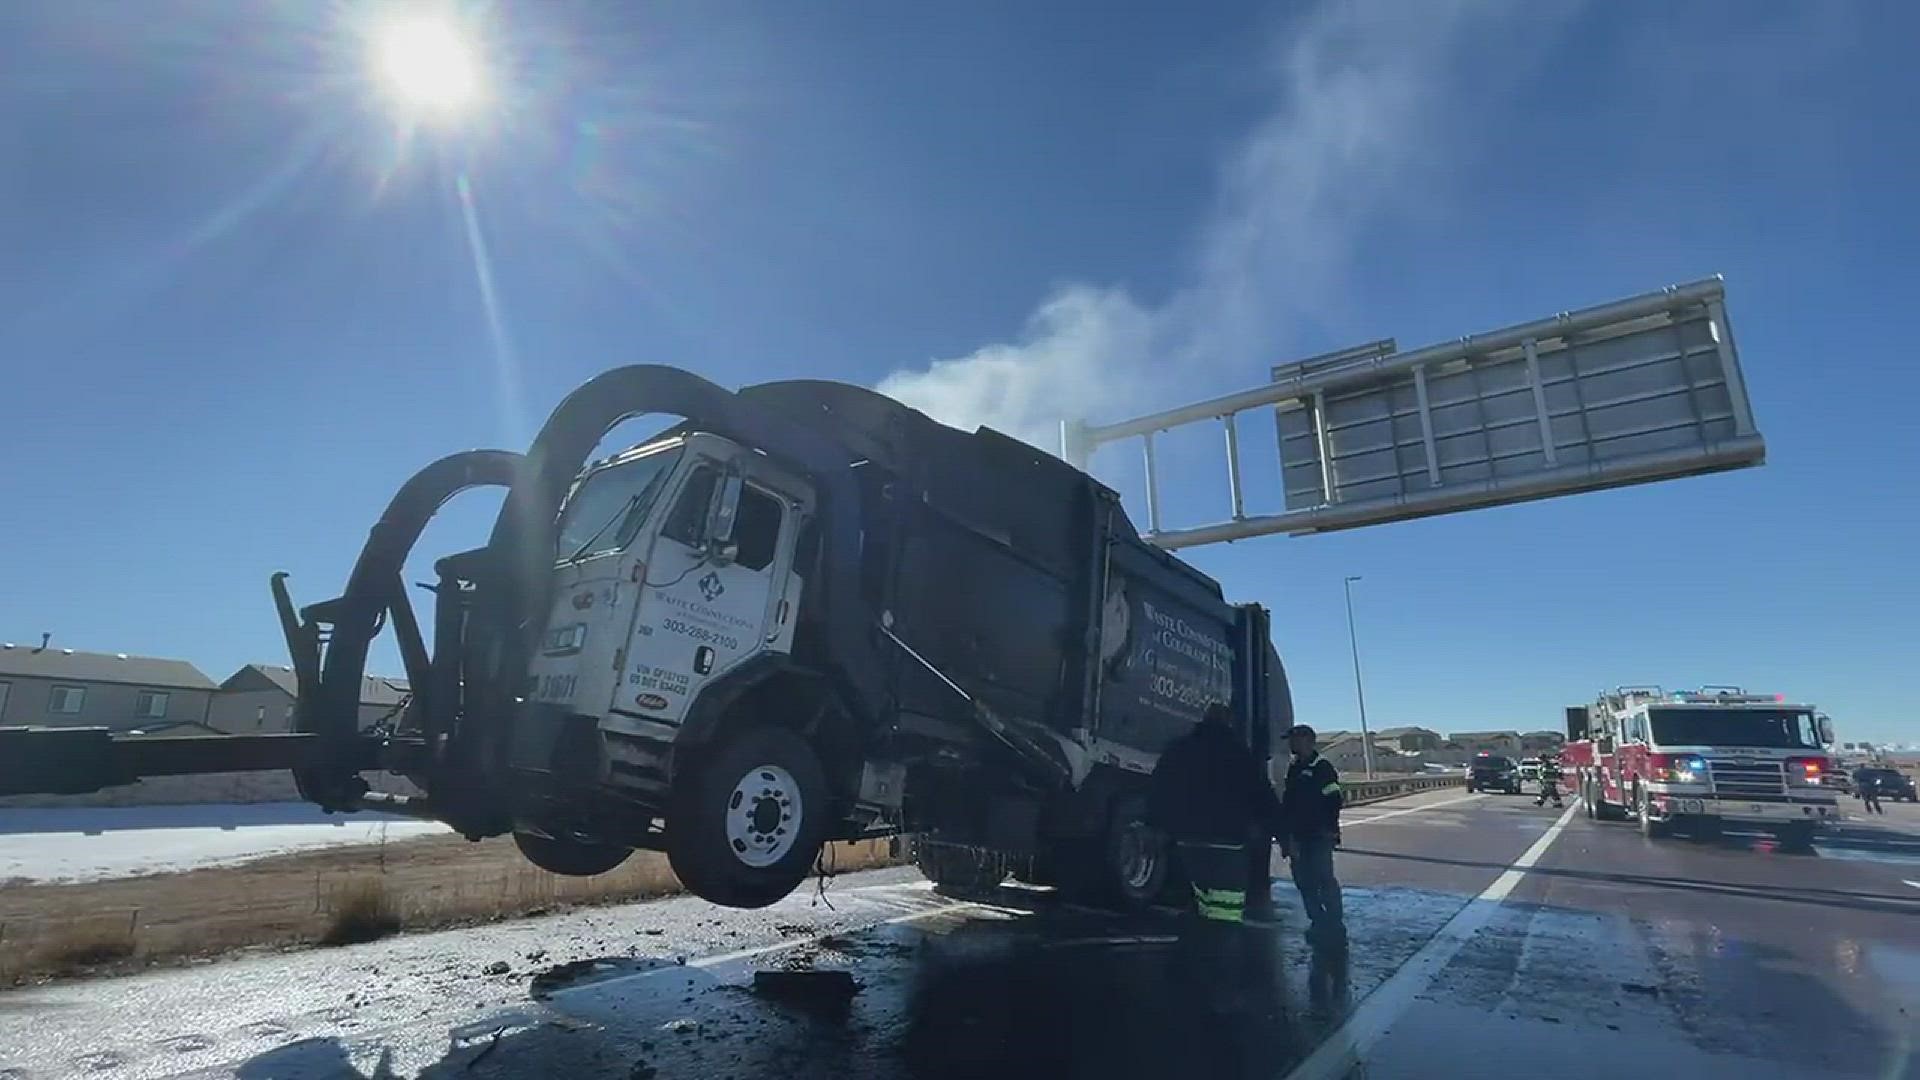 South Metro Fire Rescue crews had the still-burning garbage truck towed to a dump after being unable to put the fire out despite spraying 7,300 gallons of water.